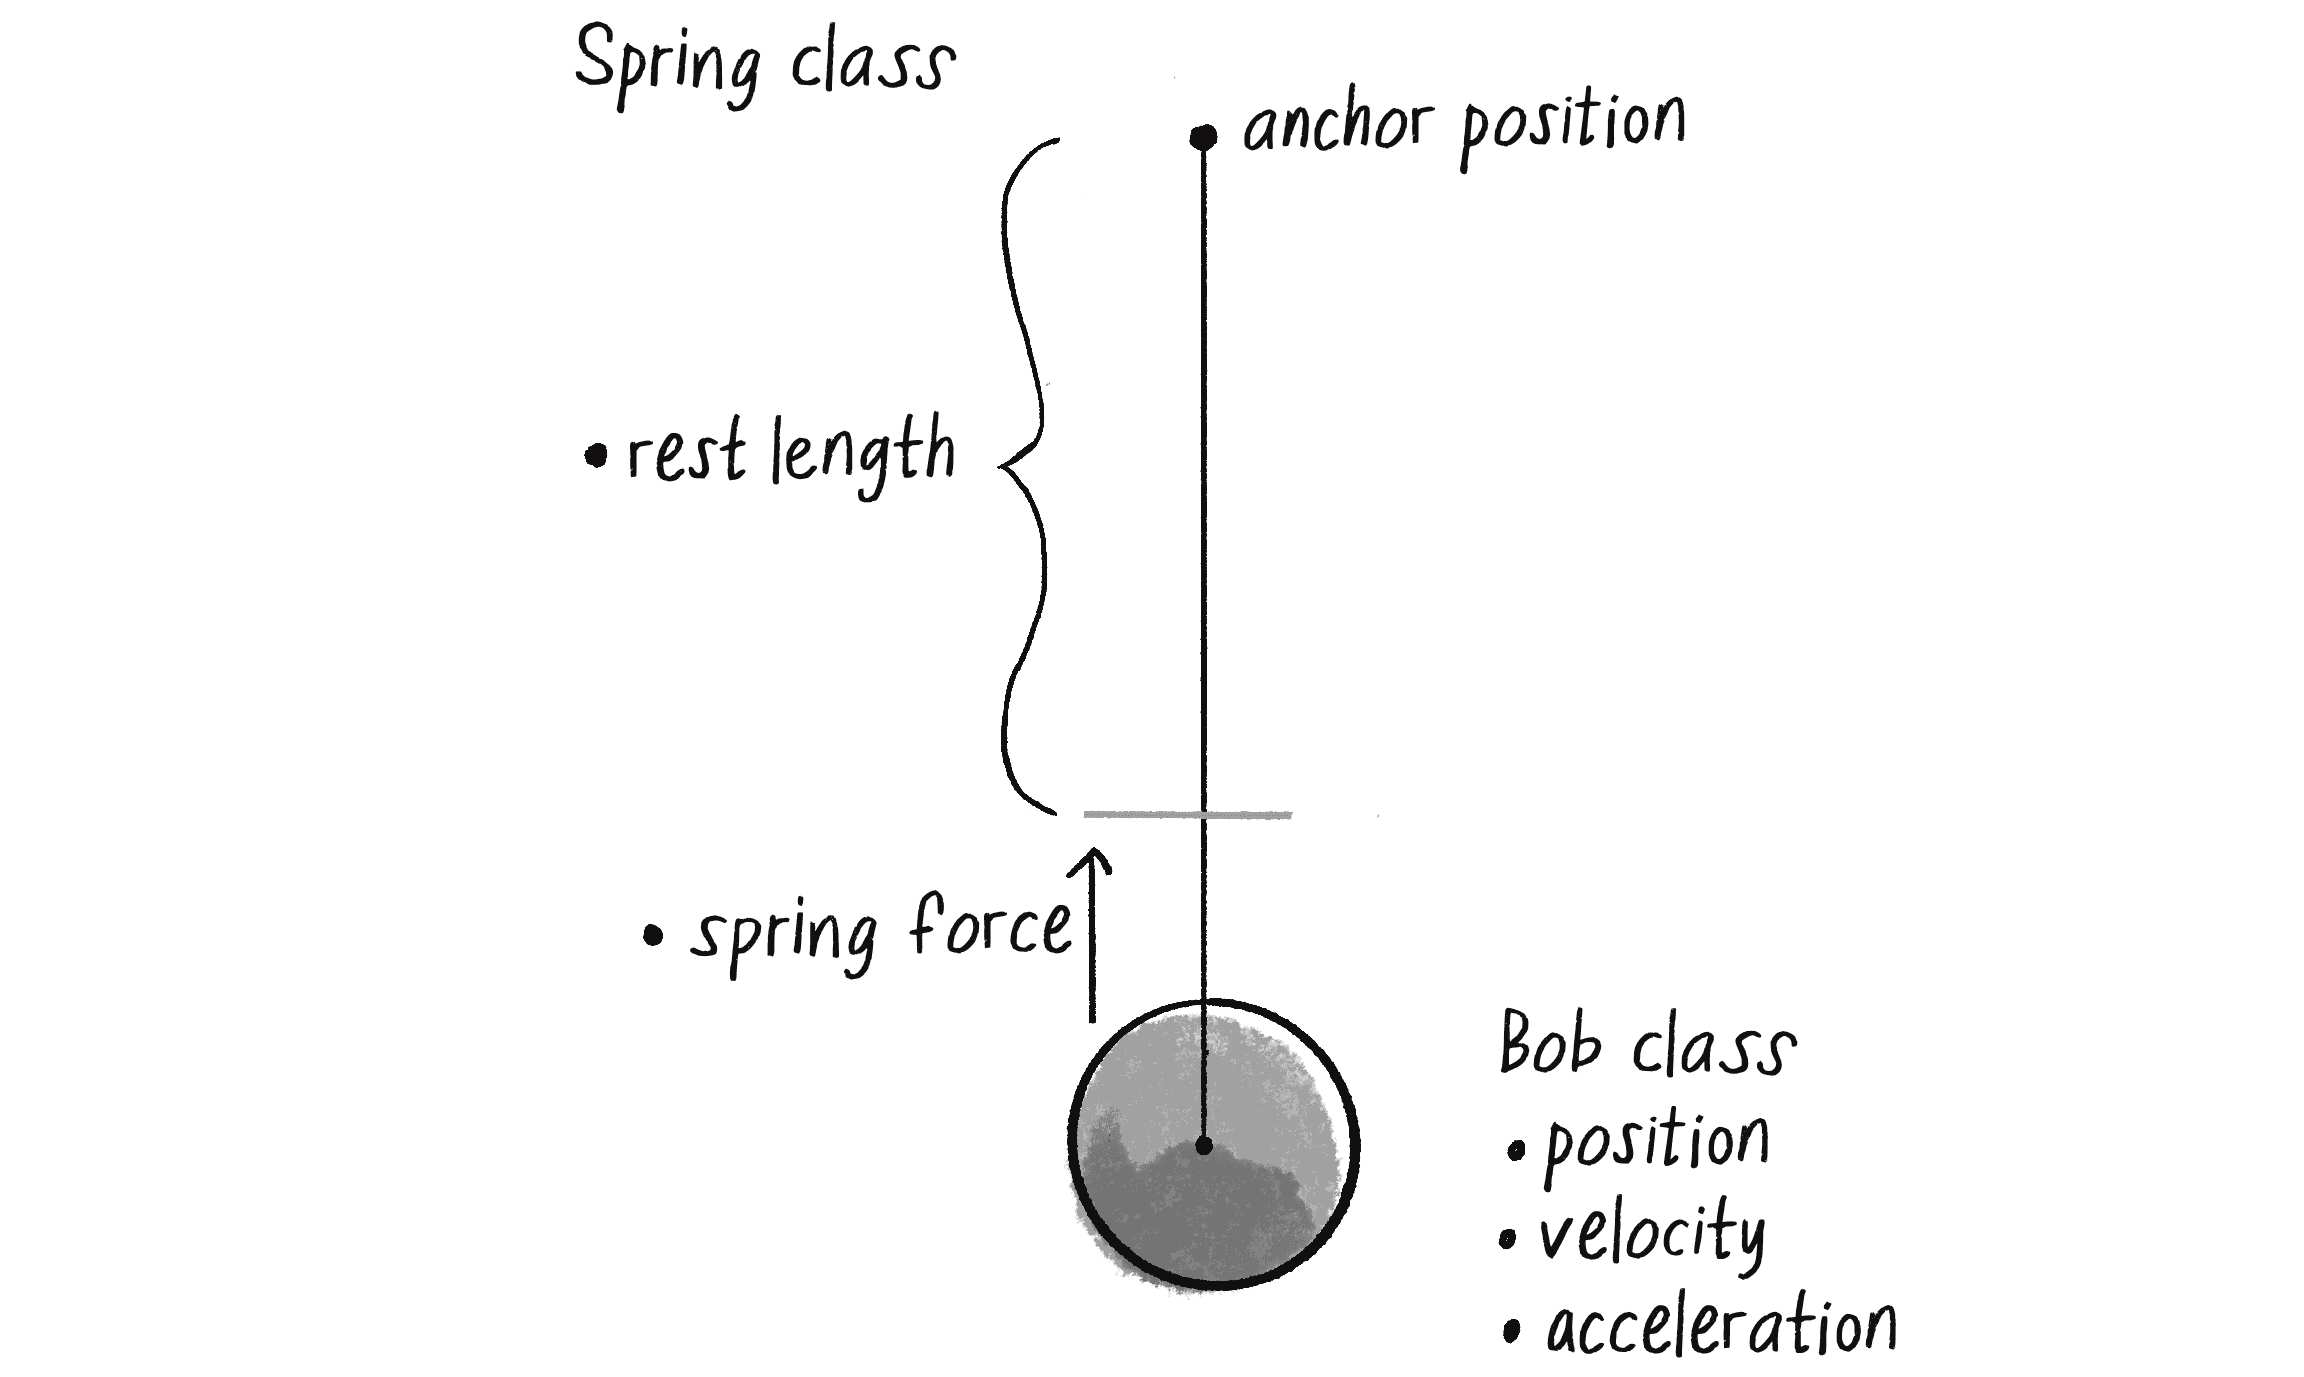 Figure 3.17: The Spring class has anchor and rest length; the Bob class has position, velocity, and acceleration.